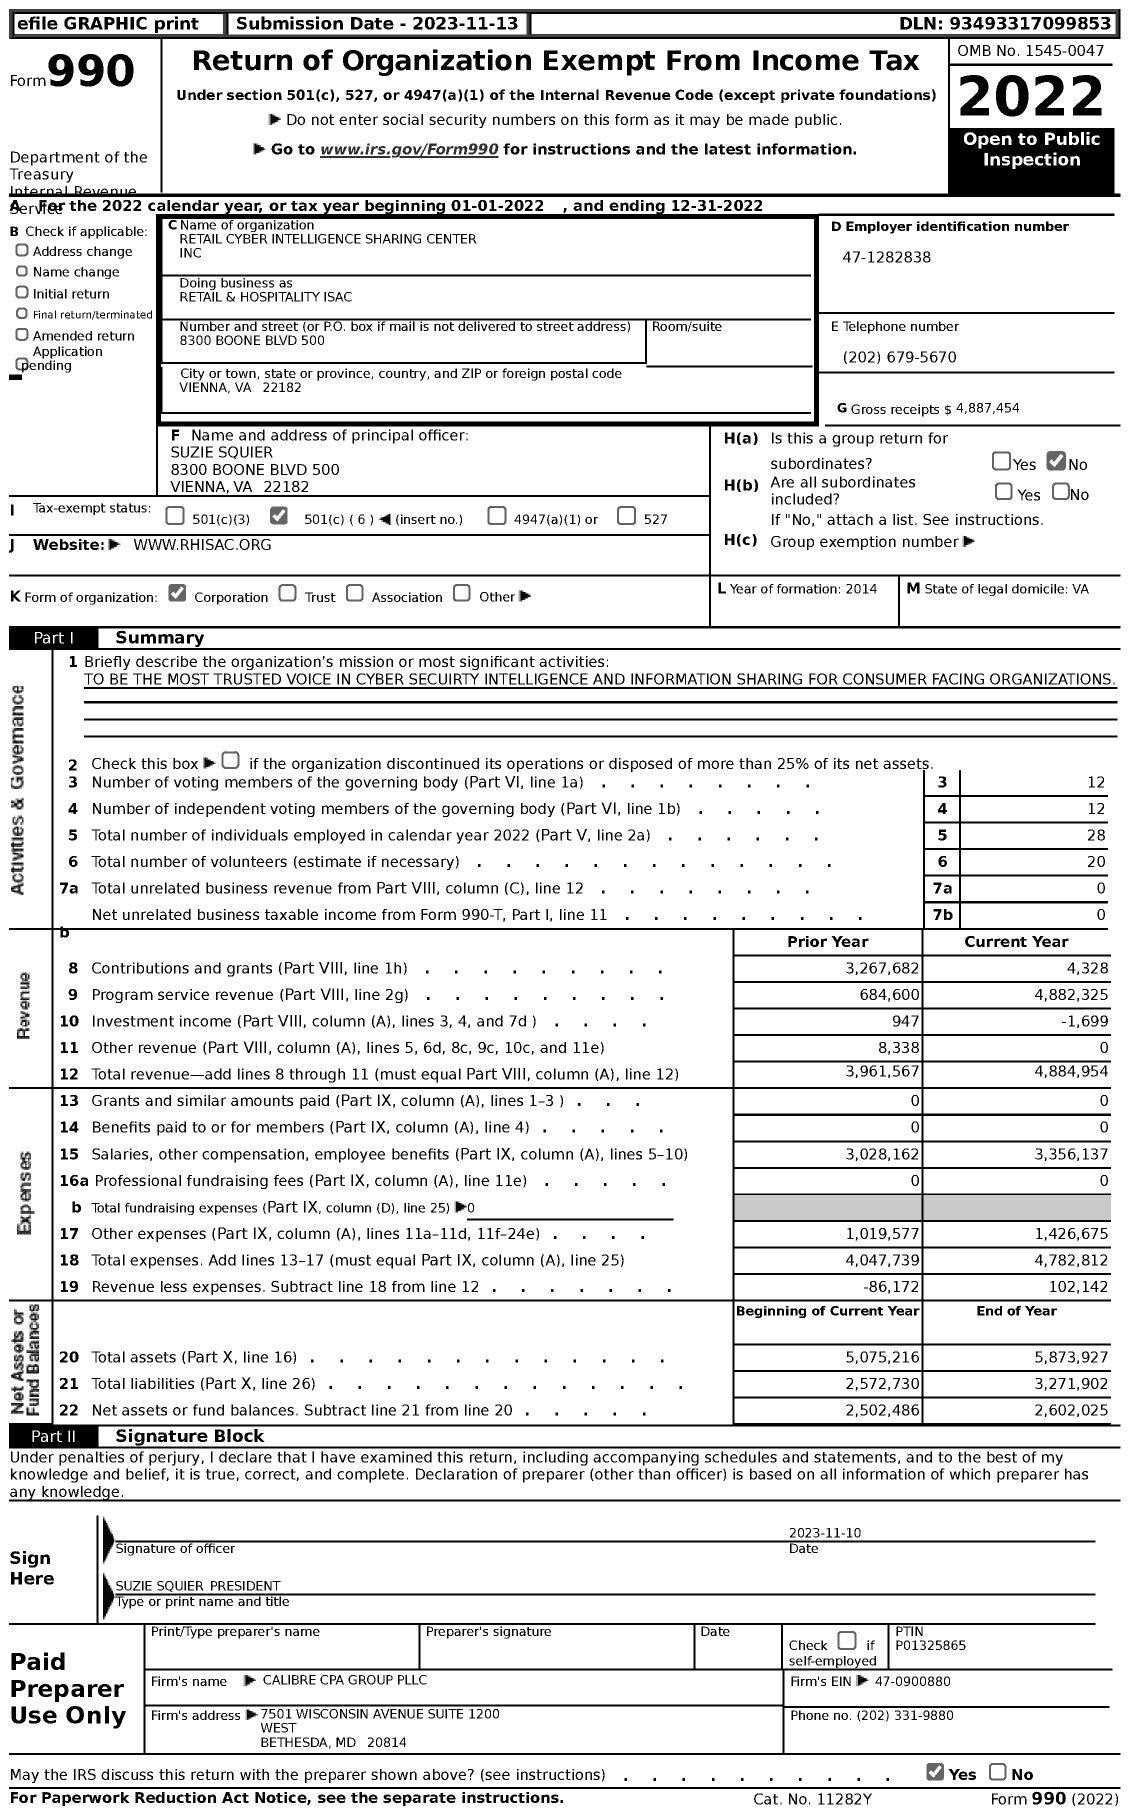 Image of first page of 2022 Form 990 for Retail and Hospitality Isac